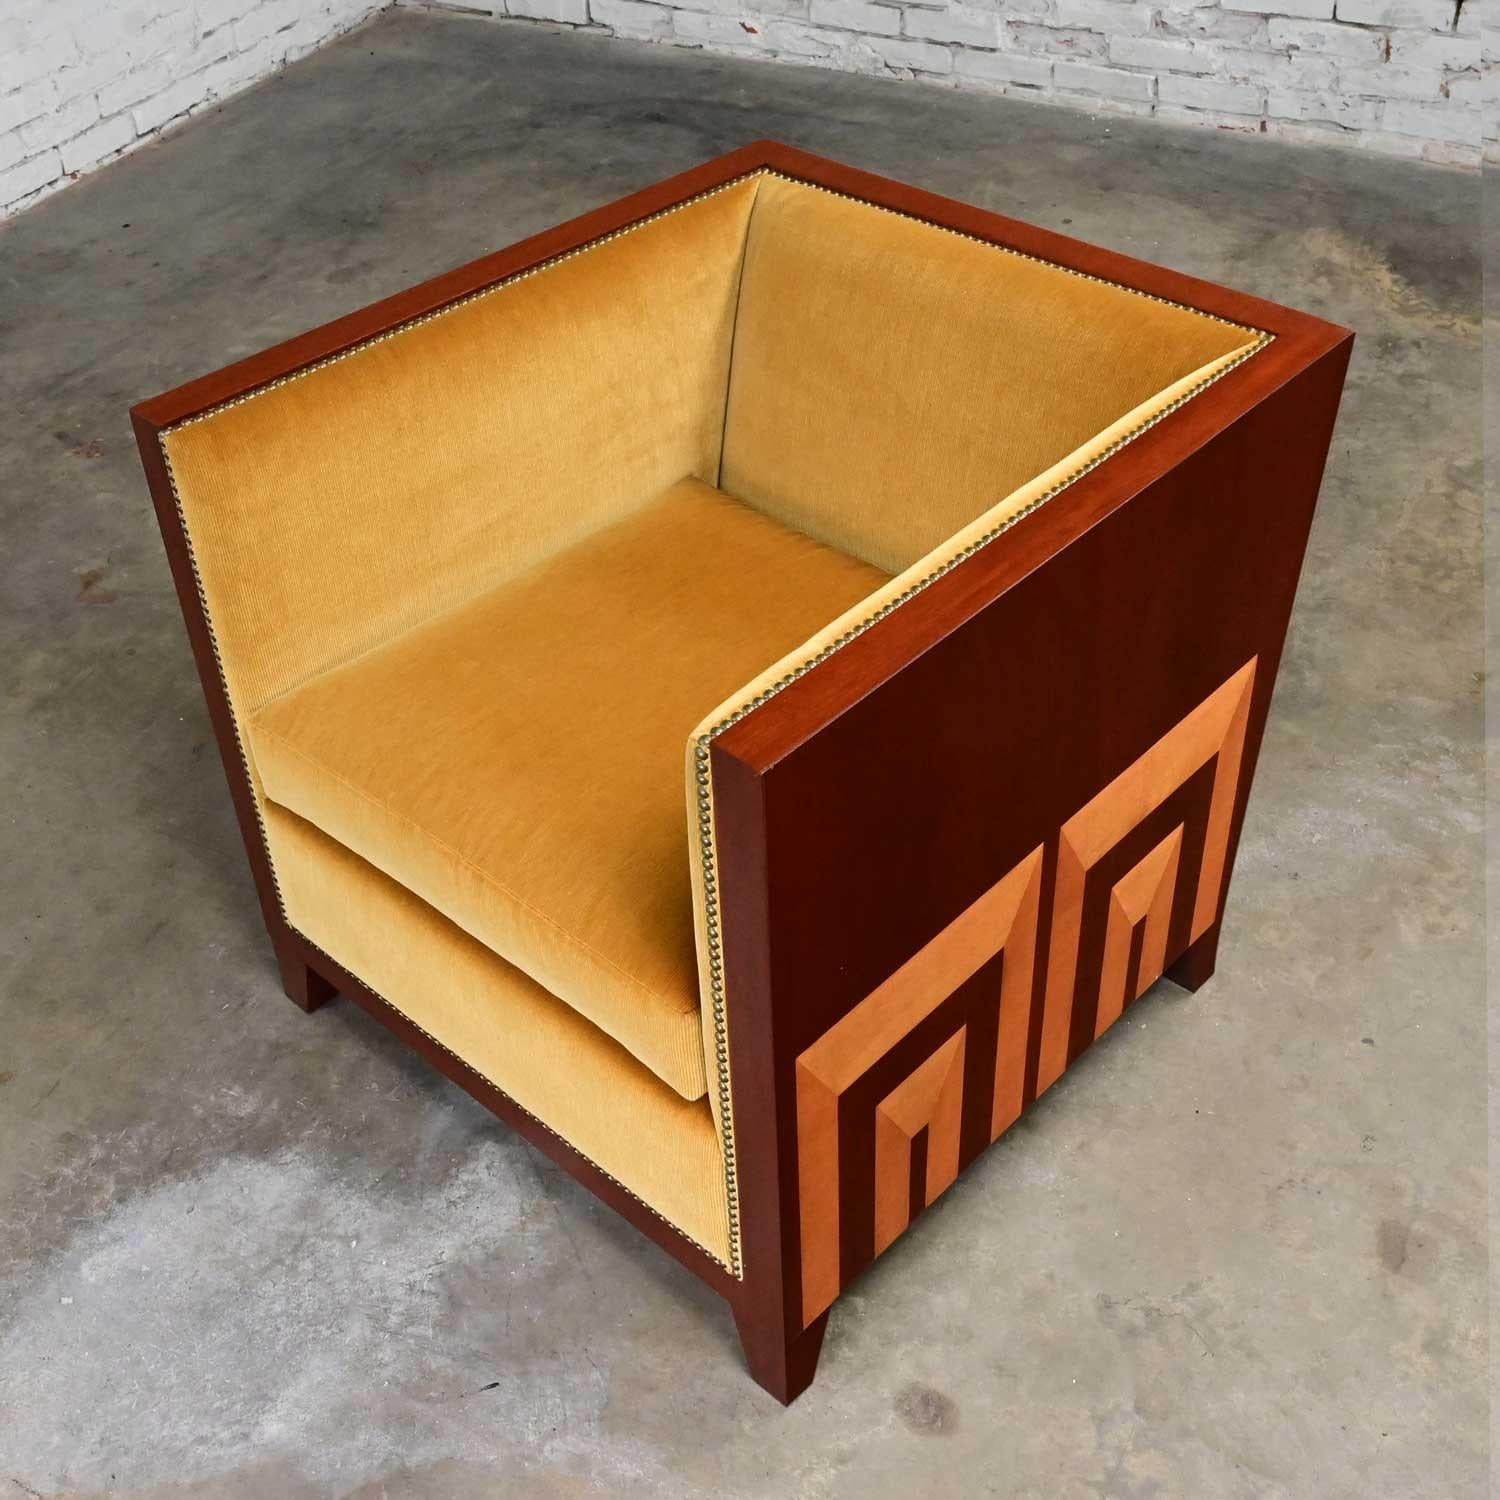 Fabulous vintage Art Deco Revival custom two-toned mahogany cube club chairs made by Rialto & designed by Zlata Pericic for Meca Design & Production, 8 available, selling separately. Comprised of mahogany frames and they are wearing their original